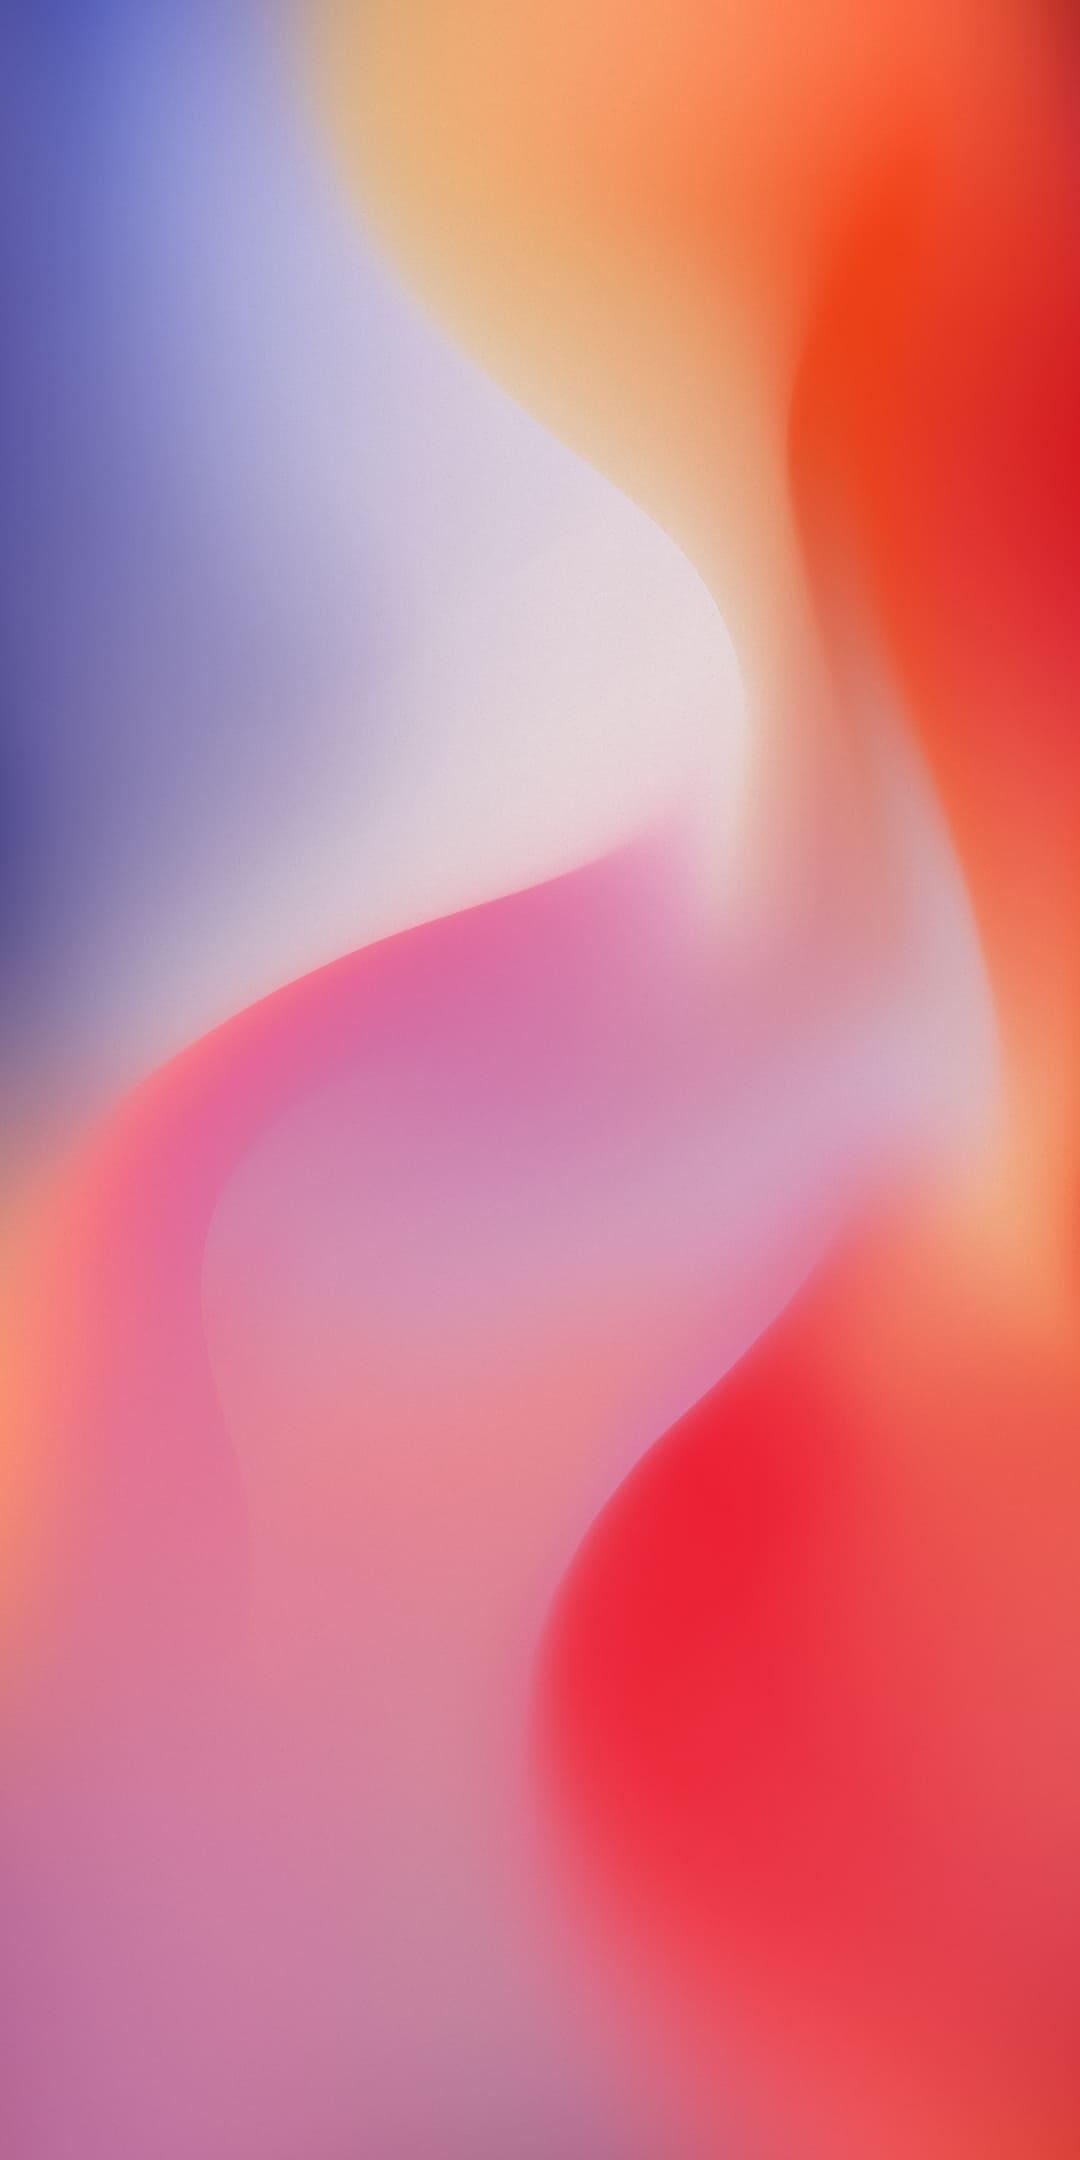 Download 34 of the MIUI 13 wallpapers here  Android Authority